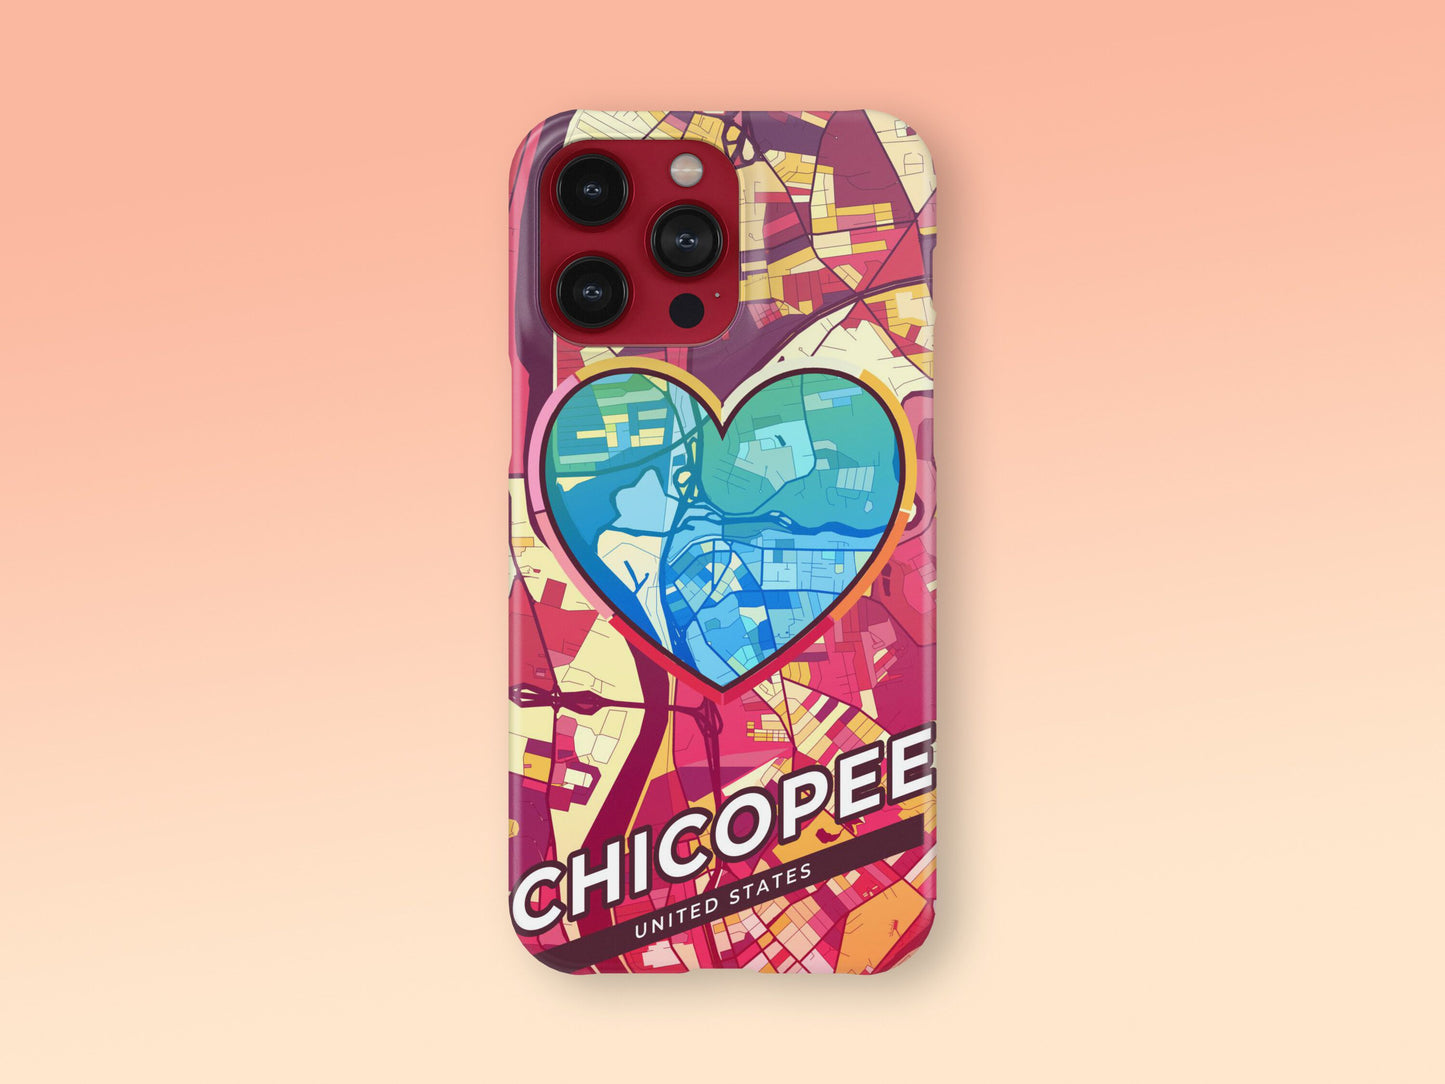 Chicopee Massachusetts slim phone case with colorful icon. Birthday, wedding or housewarming gift. Couple match cases. 2